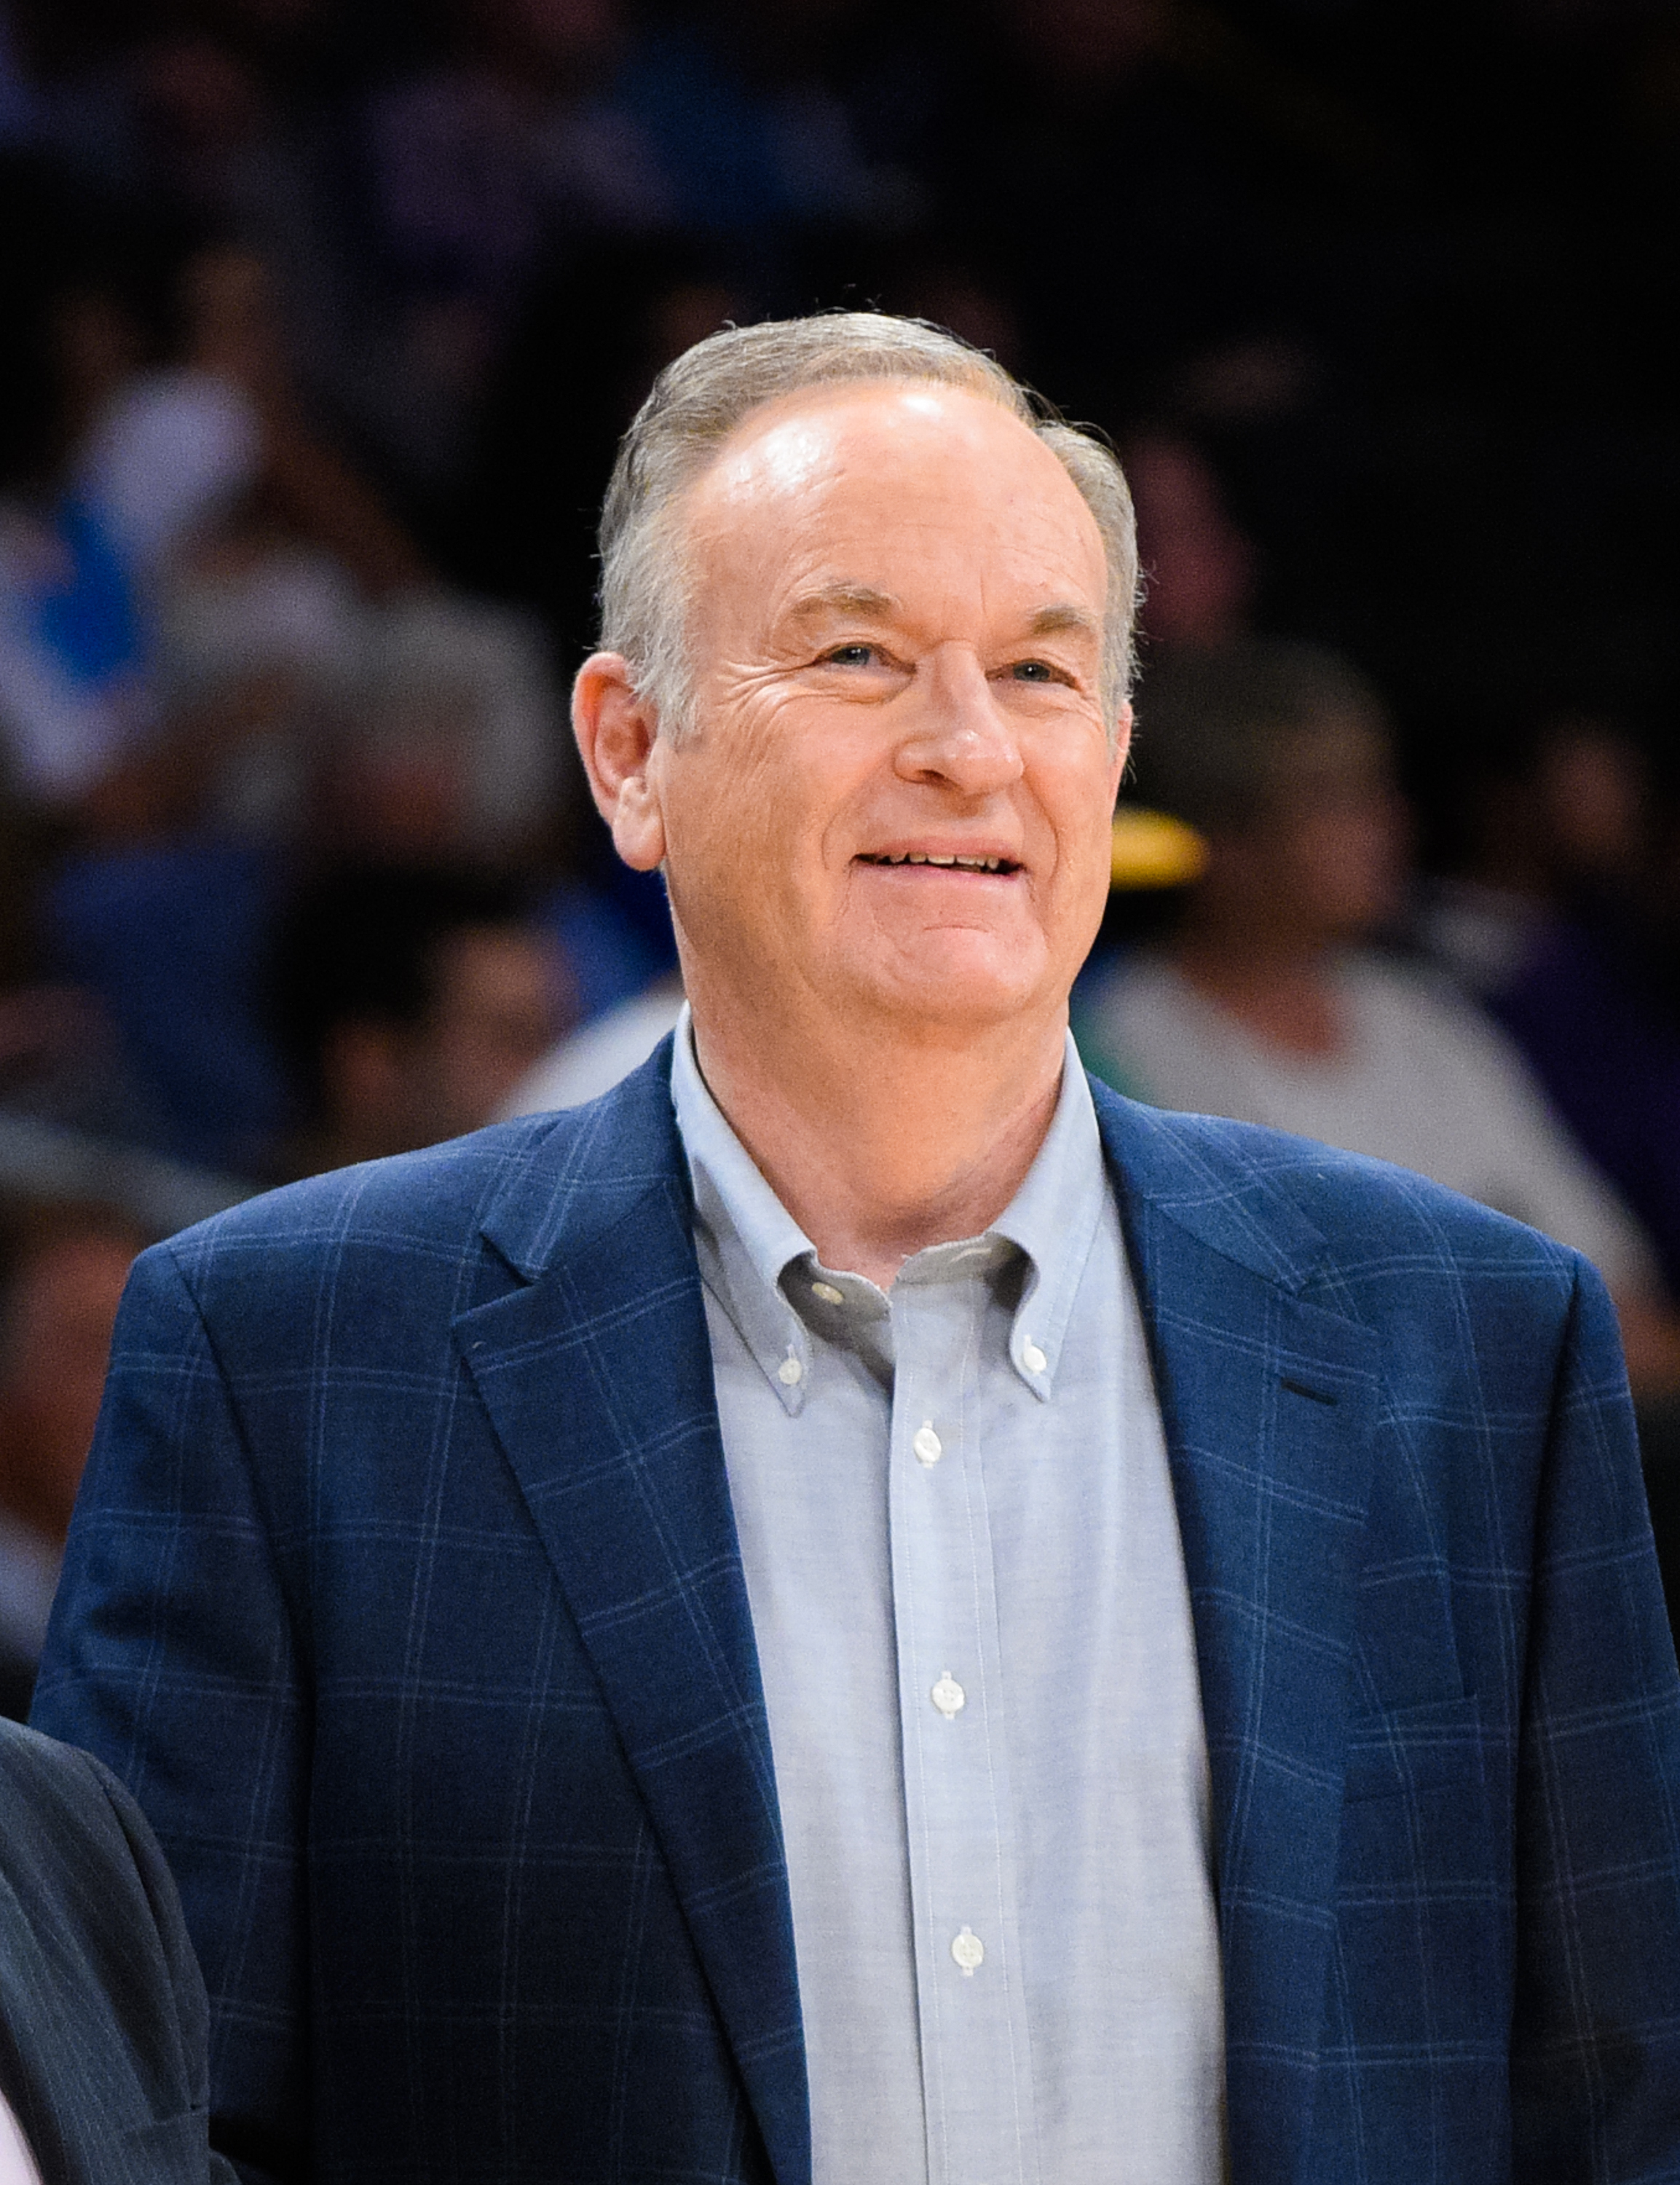 Bill O'Reilly attends a basketball game between the Denver Nuggets and the Los Angeles Lakers at Staples Center on February 10, 2015 in Los Angeles, California. (Noel Vasquez—Getty Images)